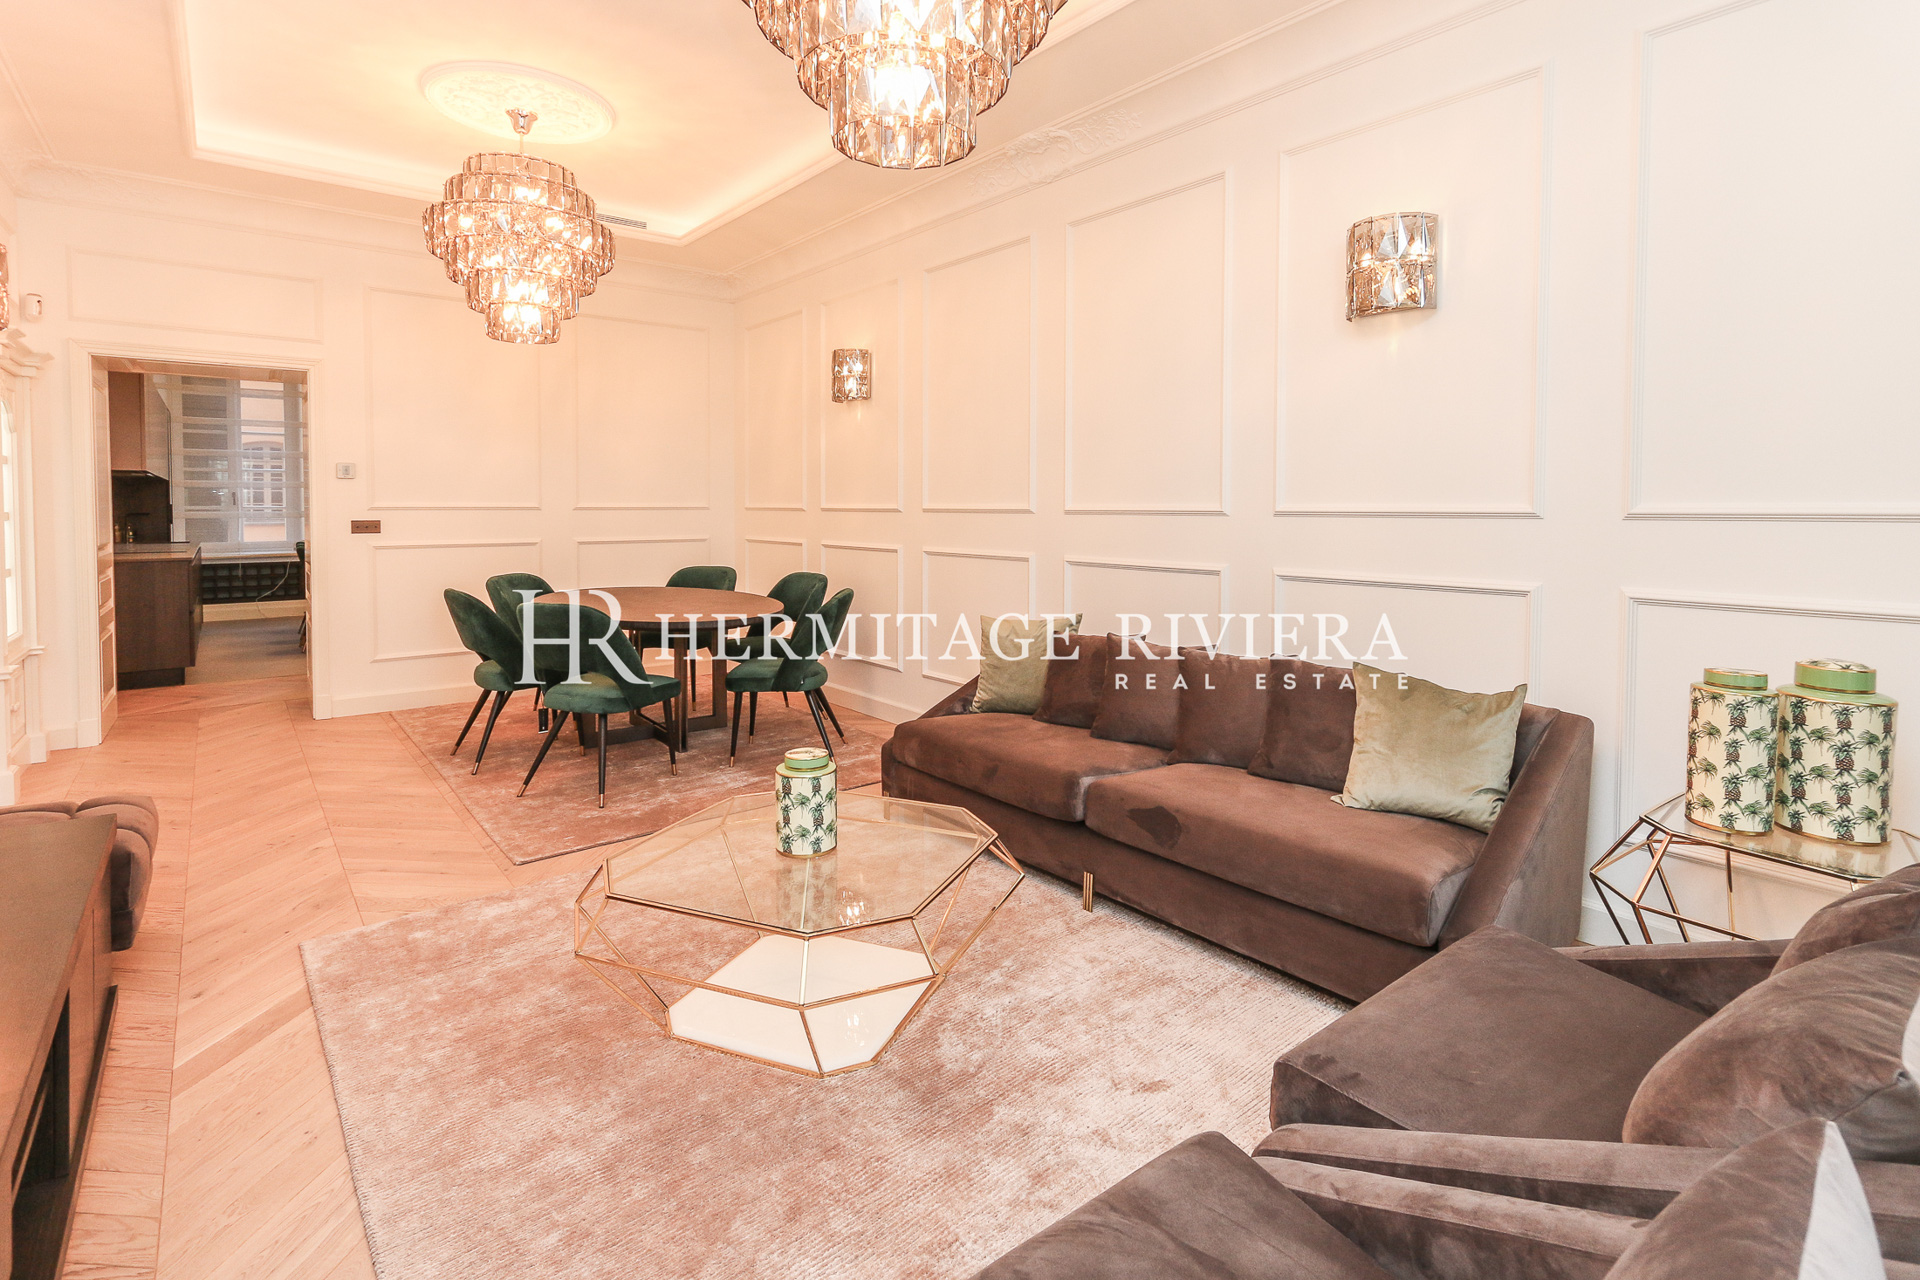 Sumptuous apartment in an exceptional location (image 6)